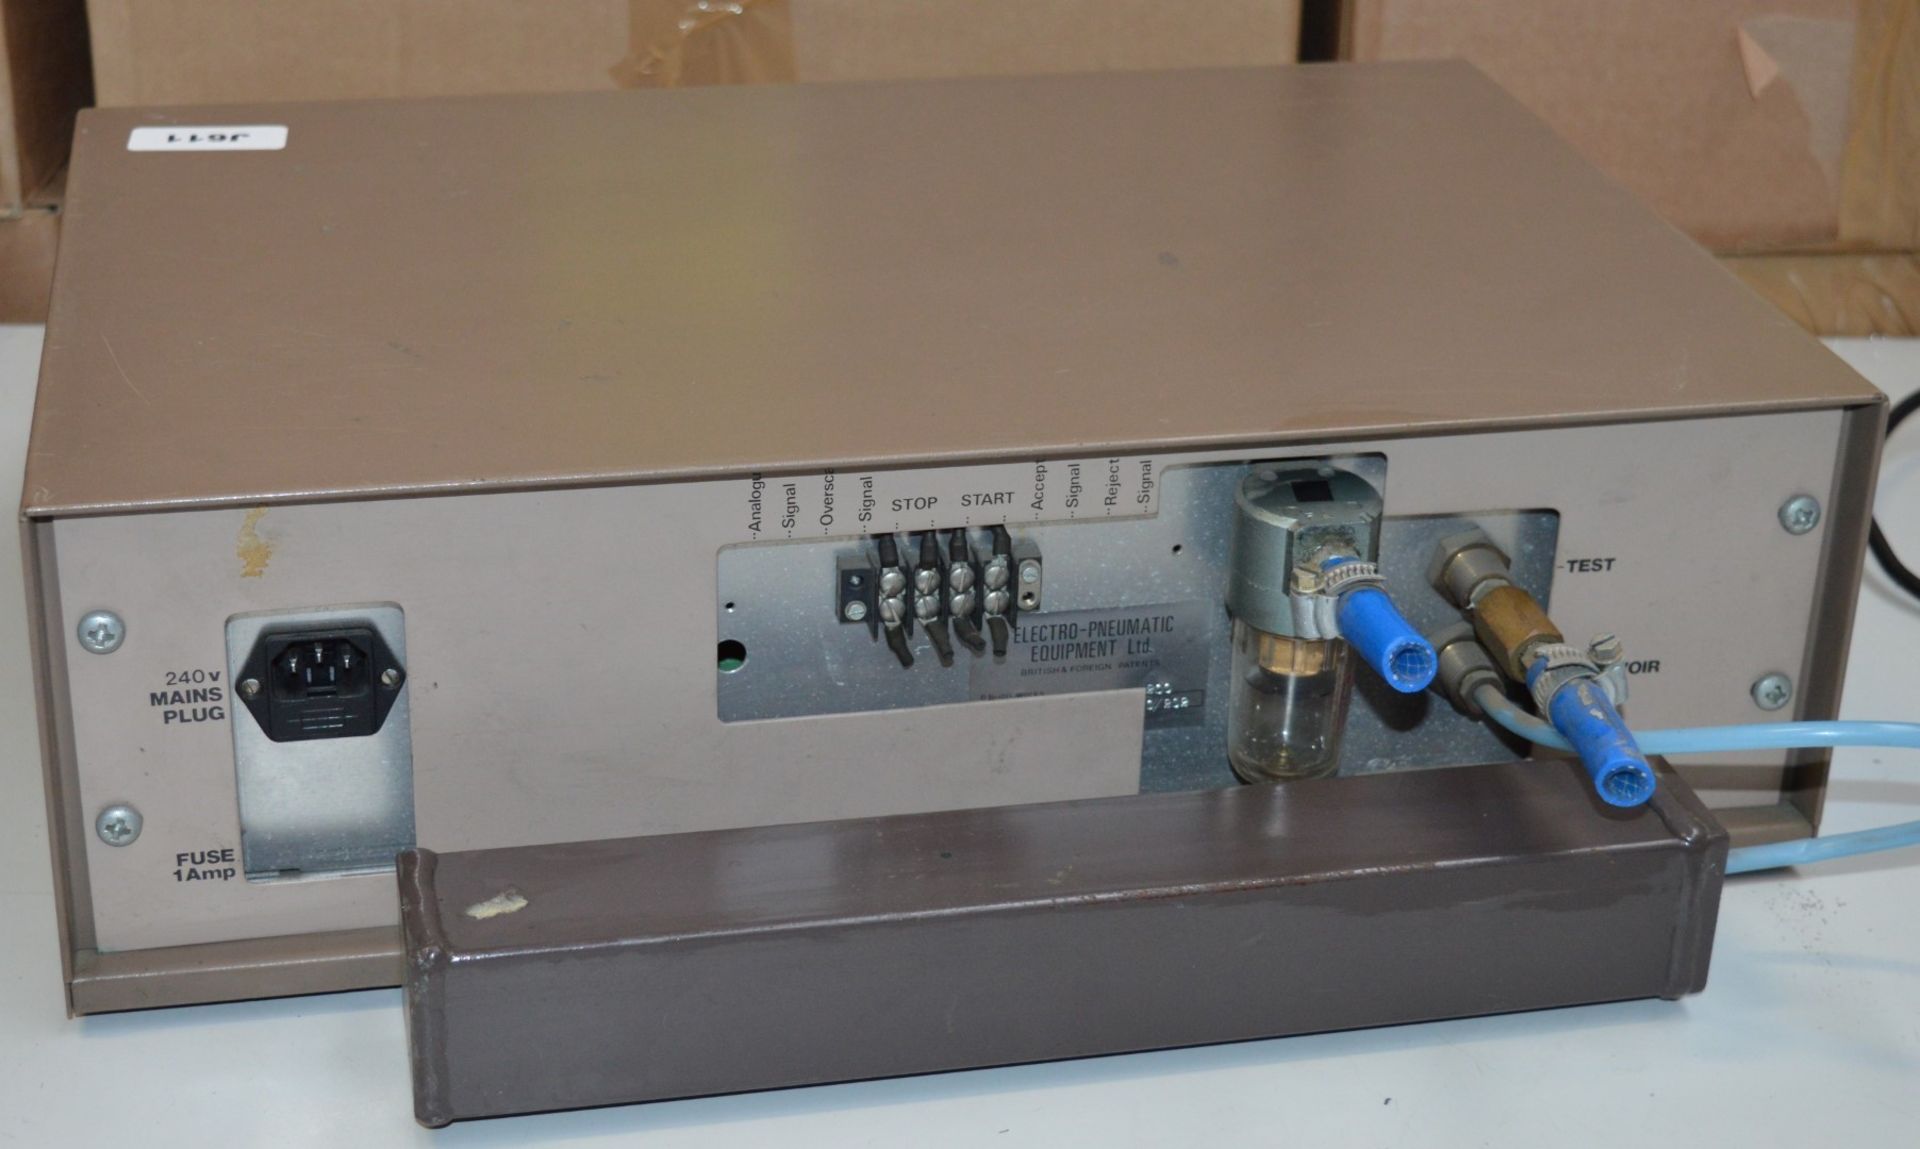 1 x Epetron 200 Mk2 Electro Pneumatic Tester - Vintage Test Equipment - CL011 - Ref J611 - Location: - Image 2 of 8